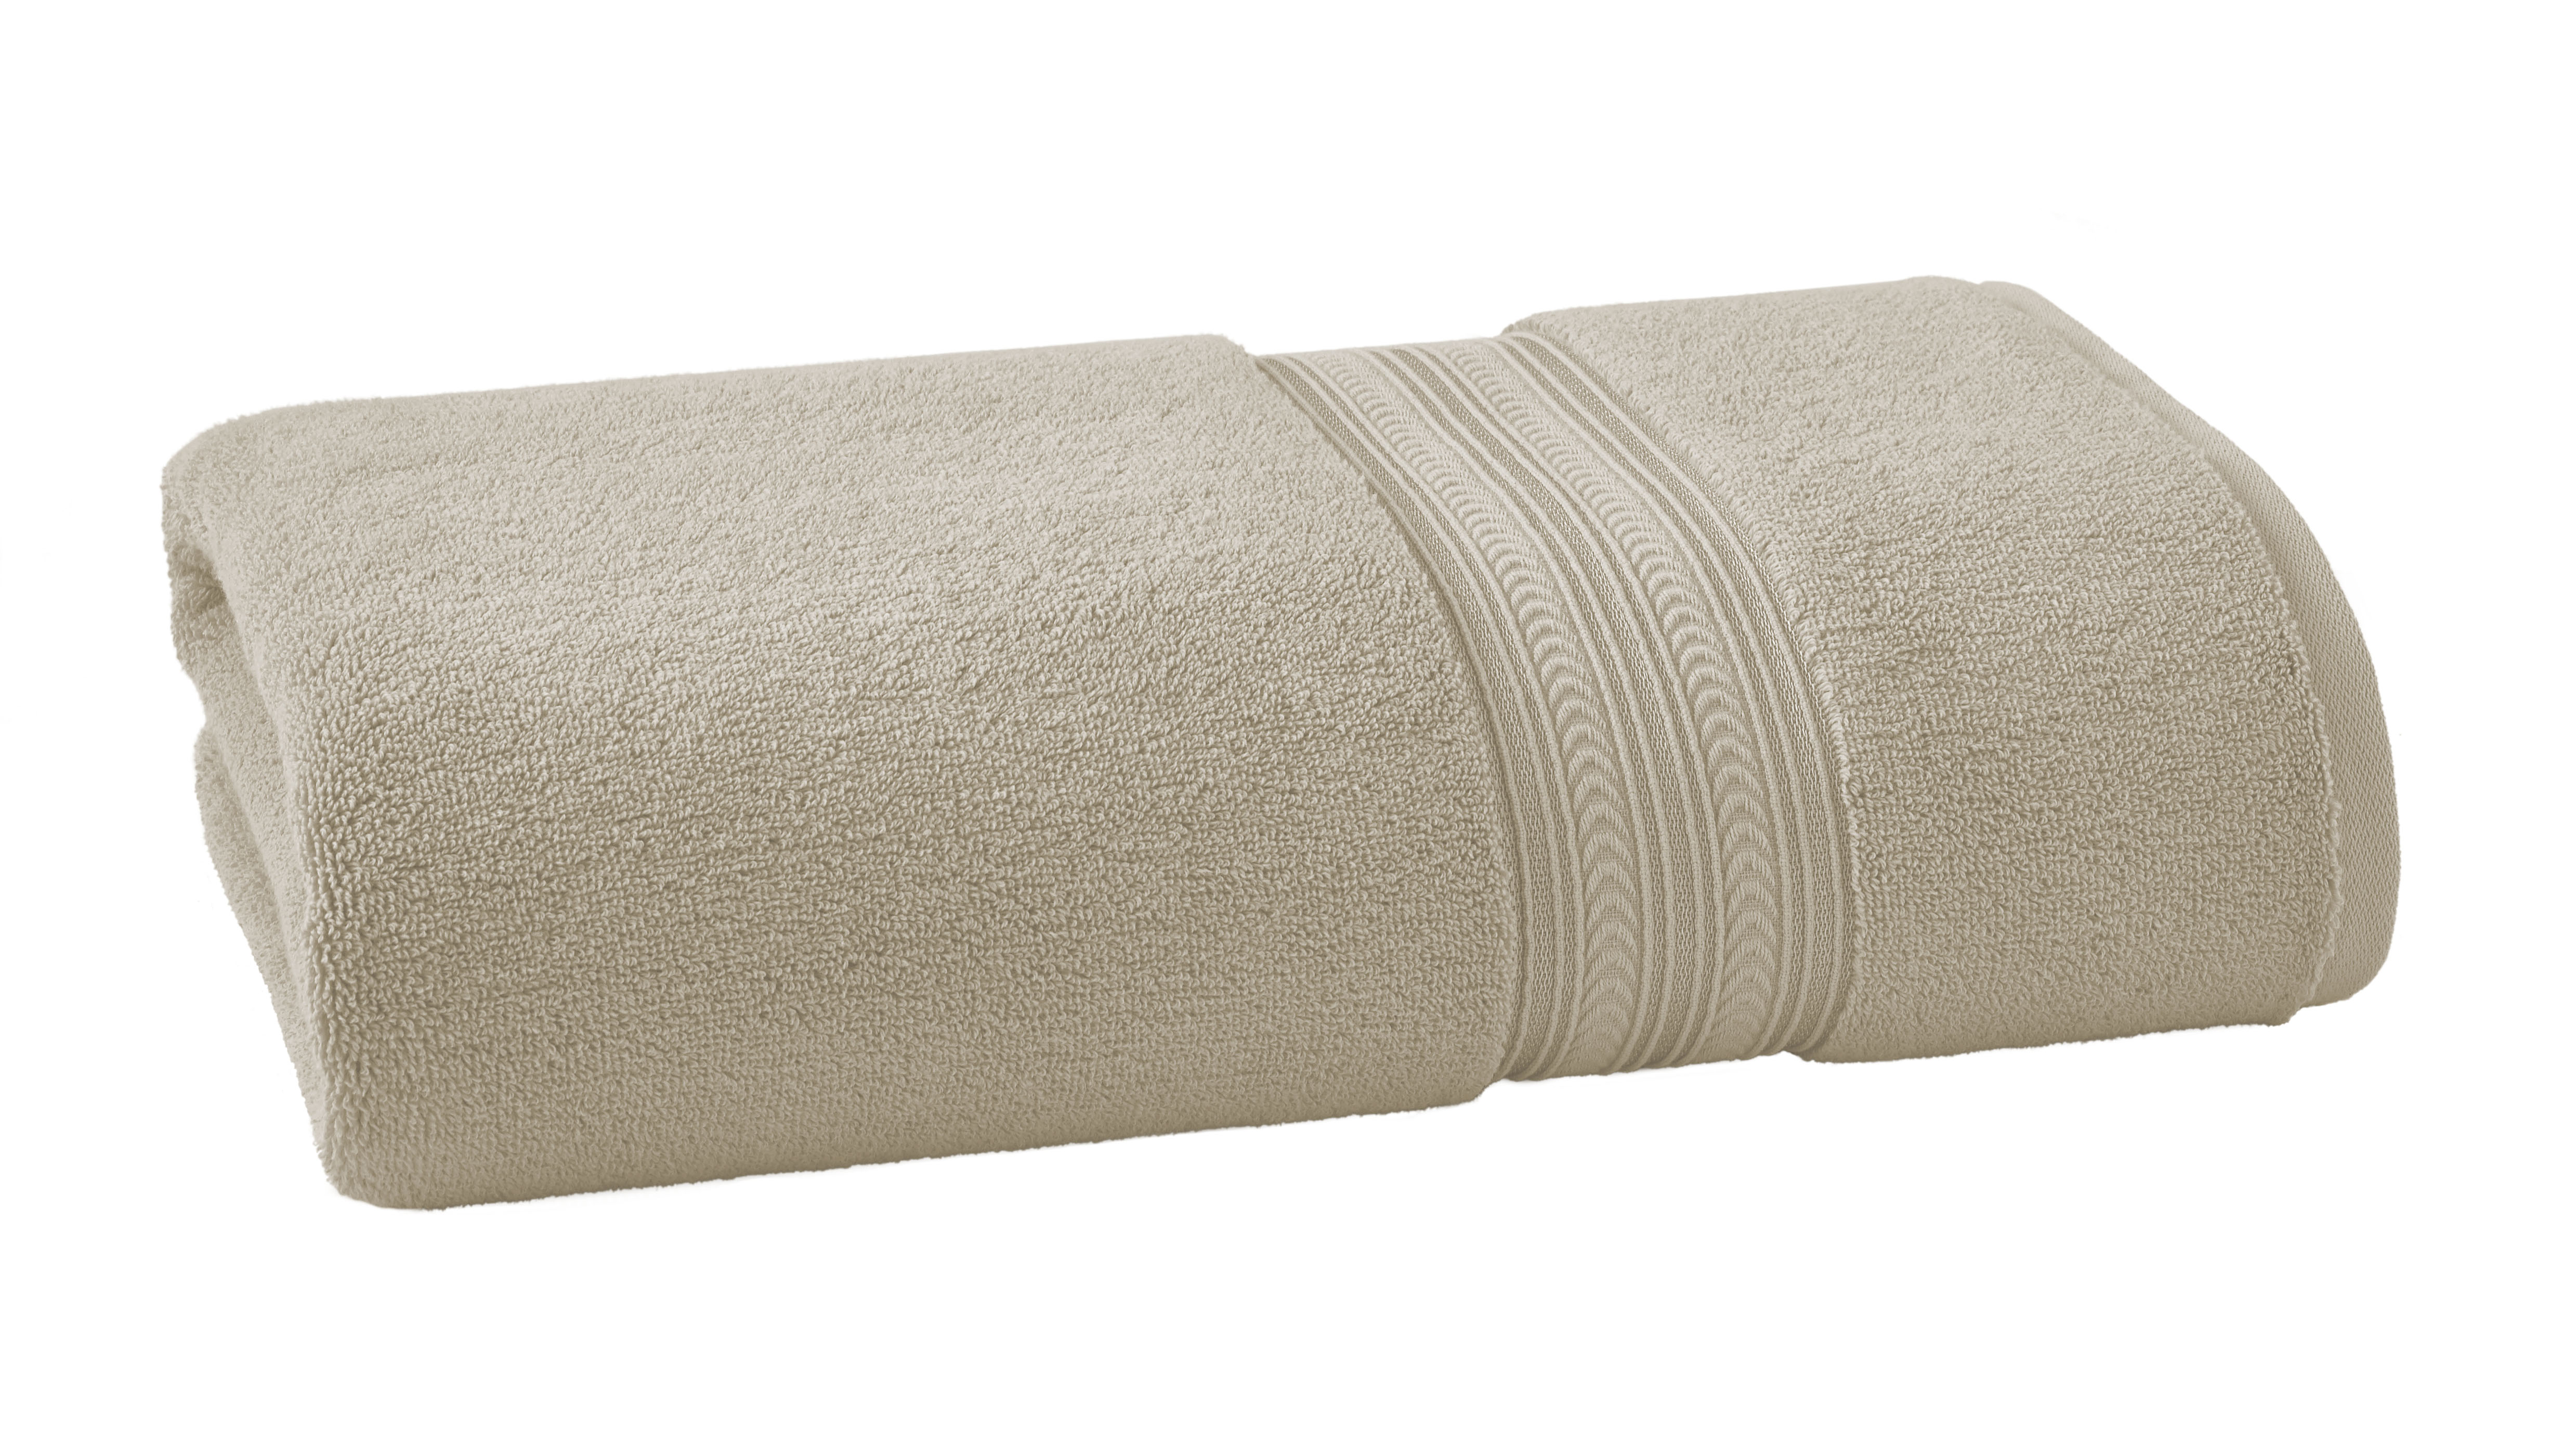 Papyrus Beige Better Homes /& Gardens BHG Thick and Plush Solid Bath Sheet Super Soft Cotton